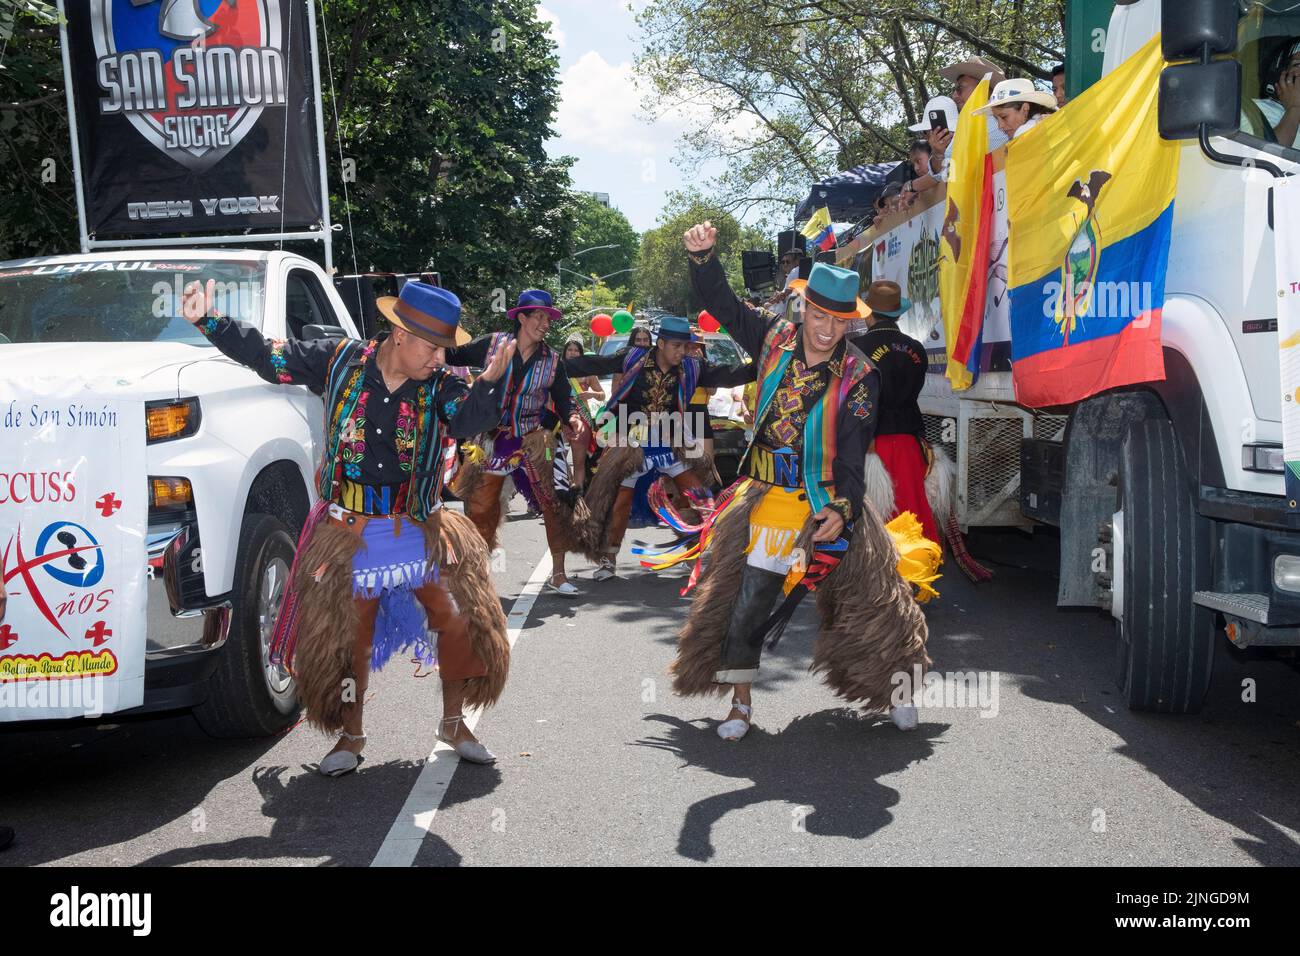 Members of the Nina Pakary dance troupe warm up prior to the Ecuadarian Parade NYC 2022 in Jackson Heights, Queens, New York. Stock Photo